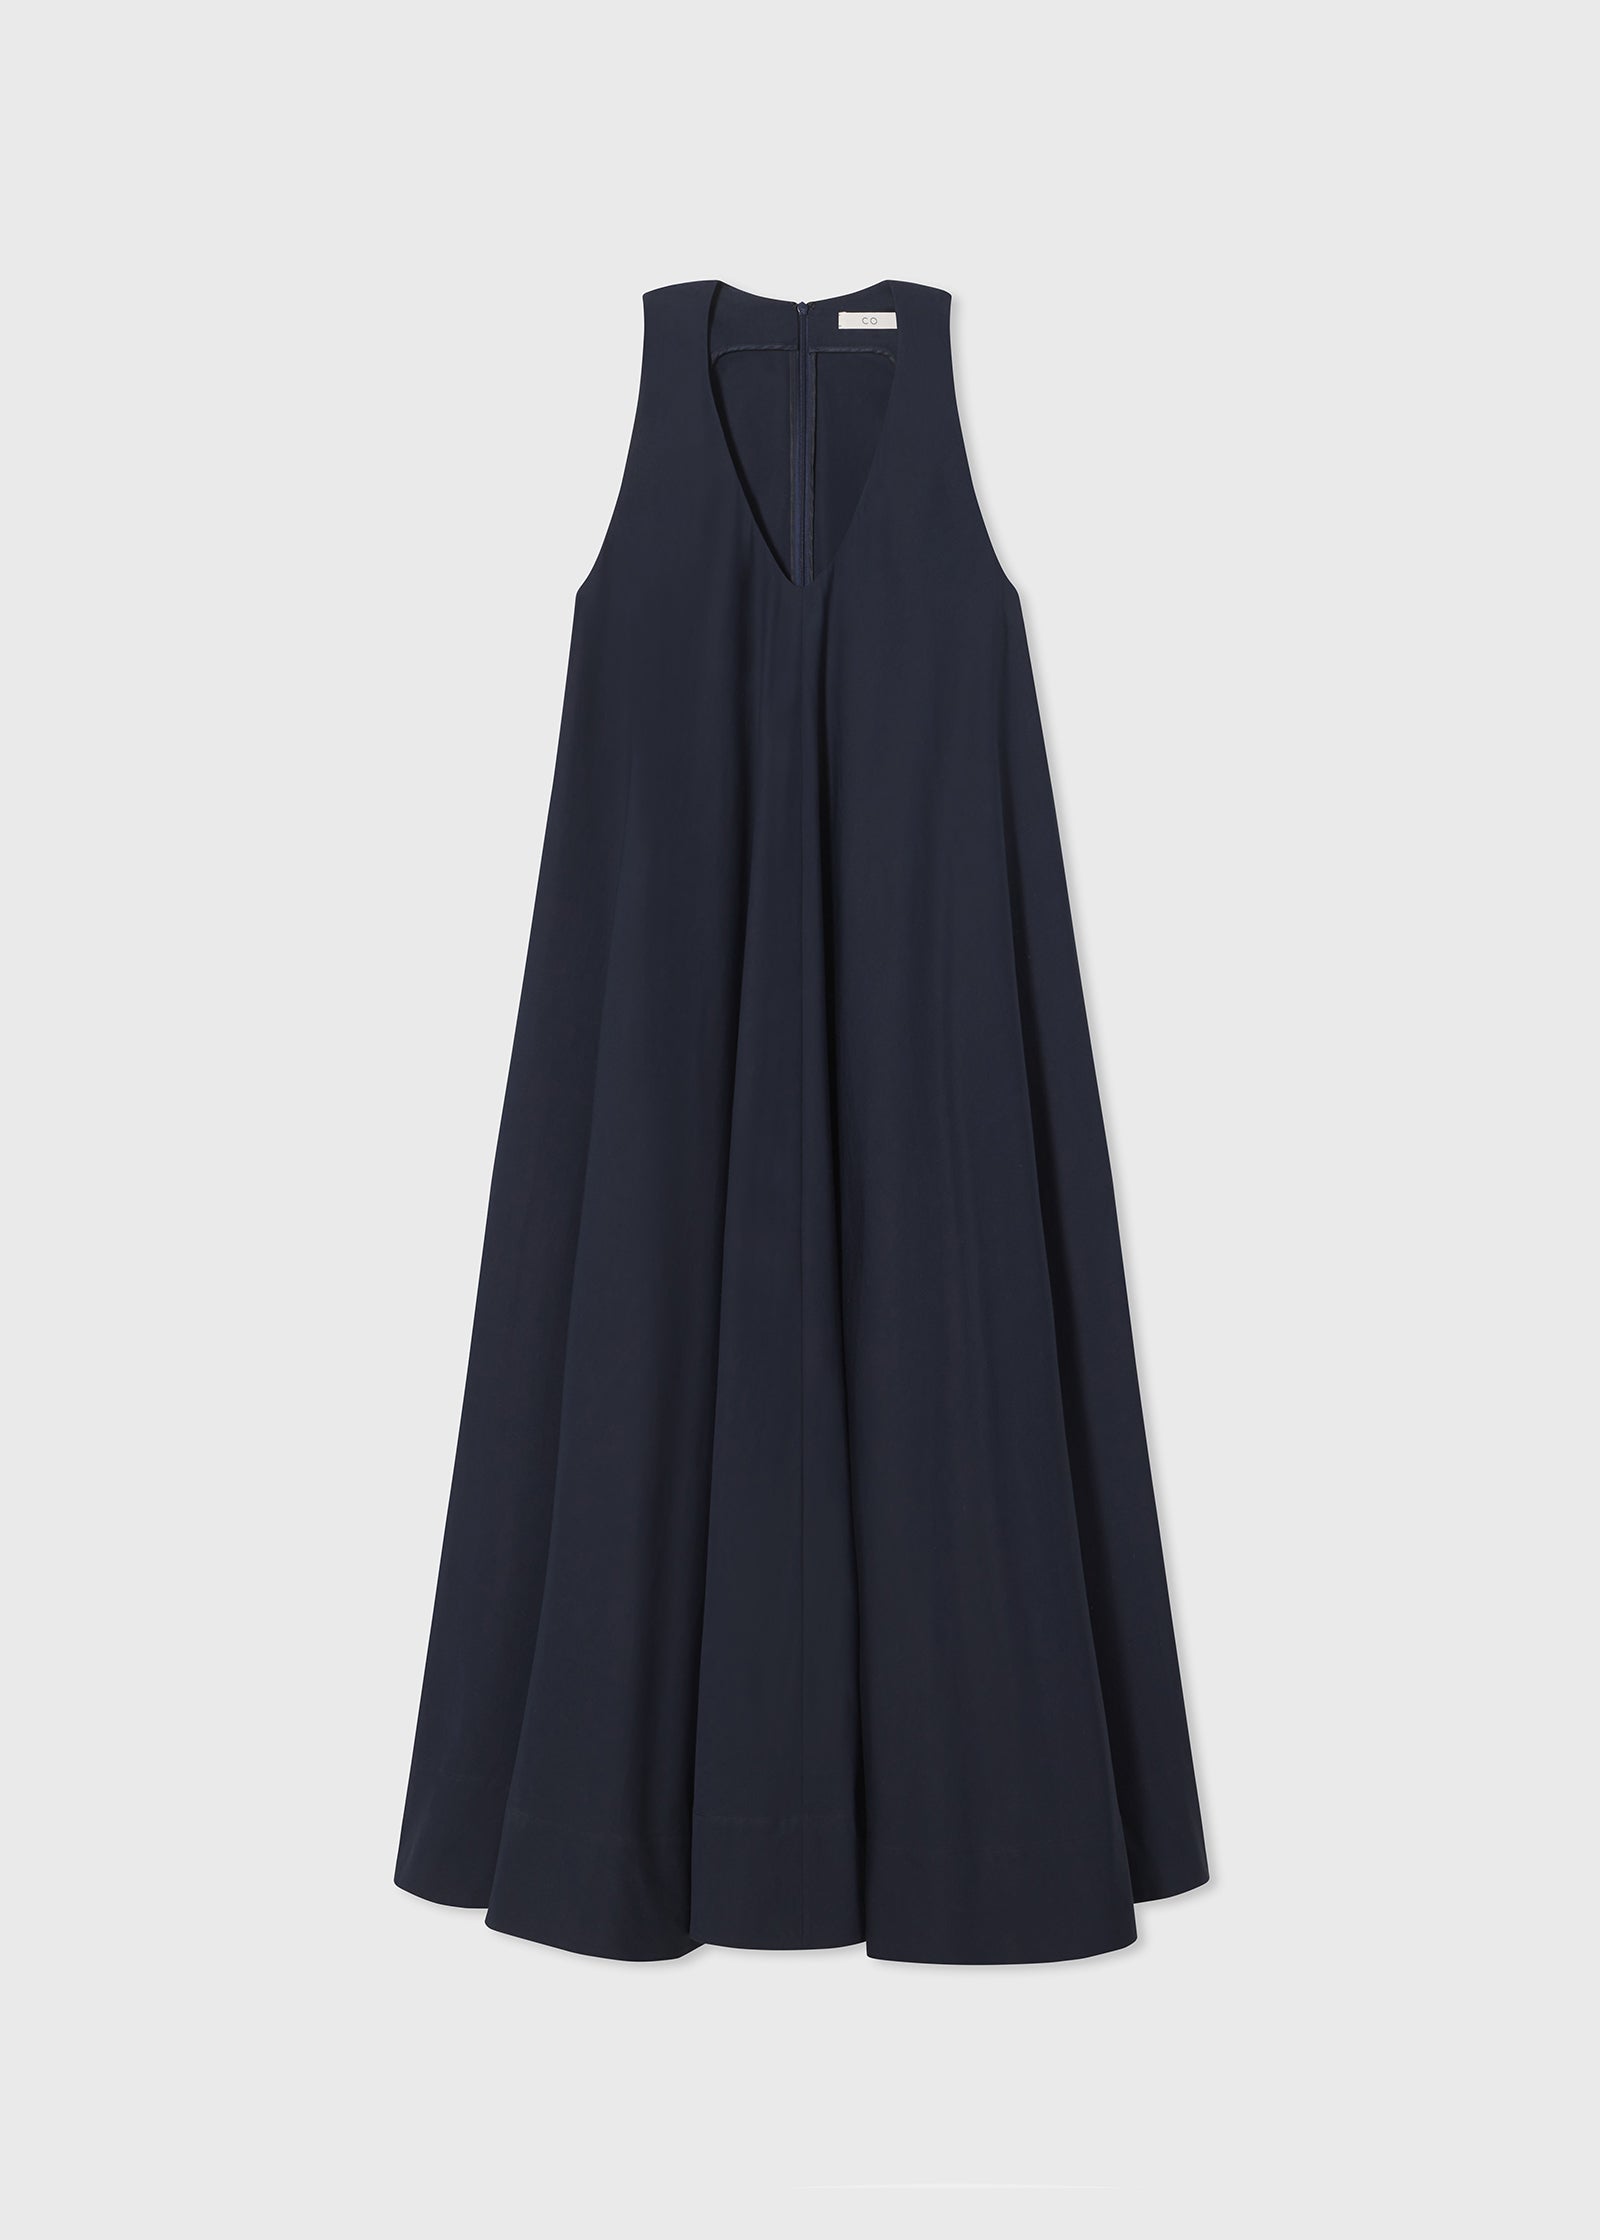 Sleeveless V-Neck Tent Dress in Silk Cotton - Navy - CO Collections